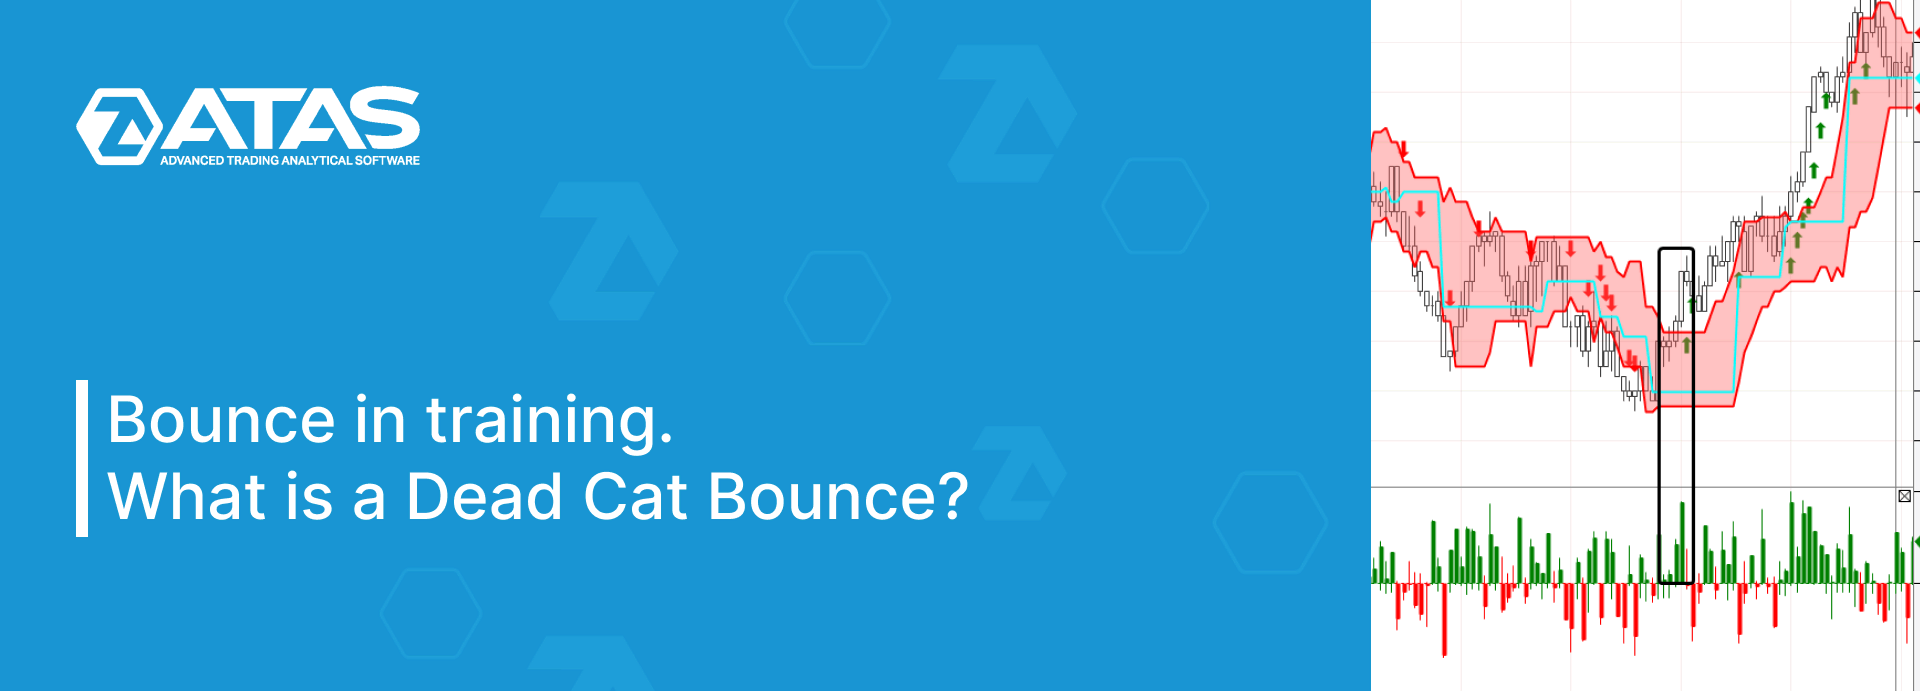 Bounce in training. What is a Dead Cat Bounce?